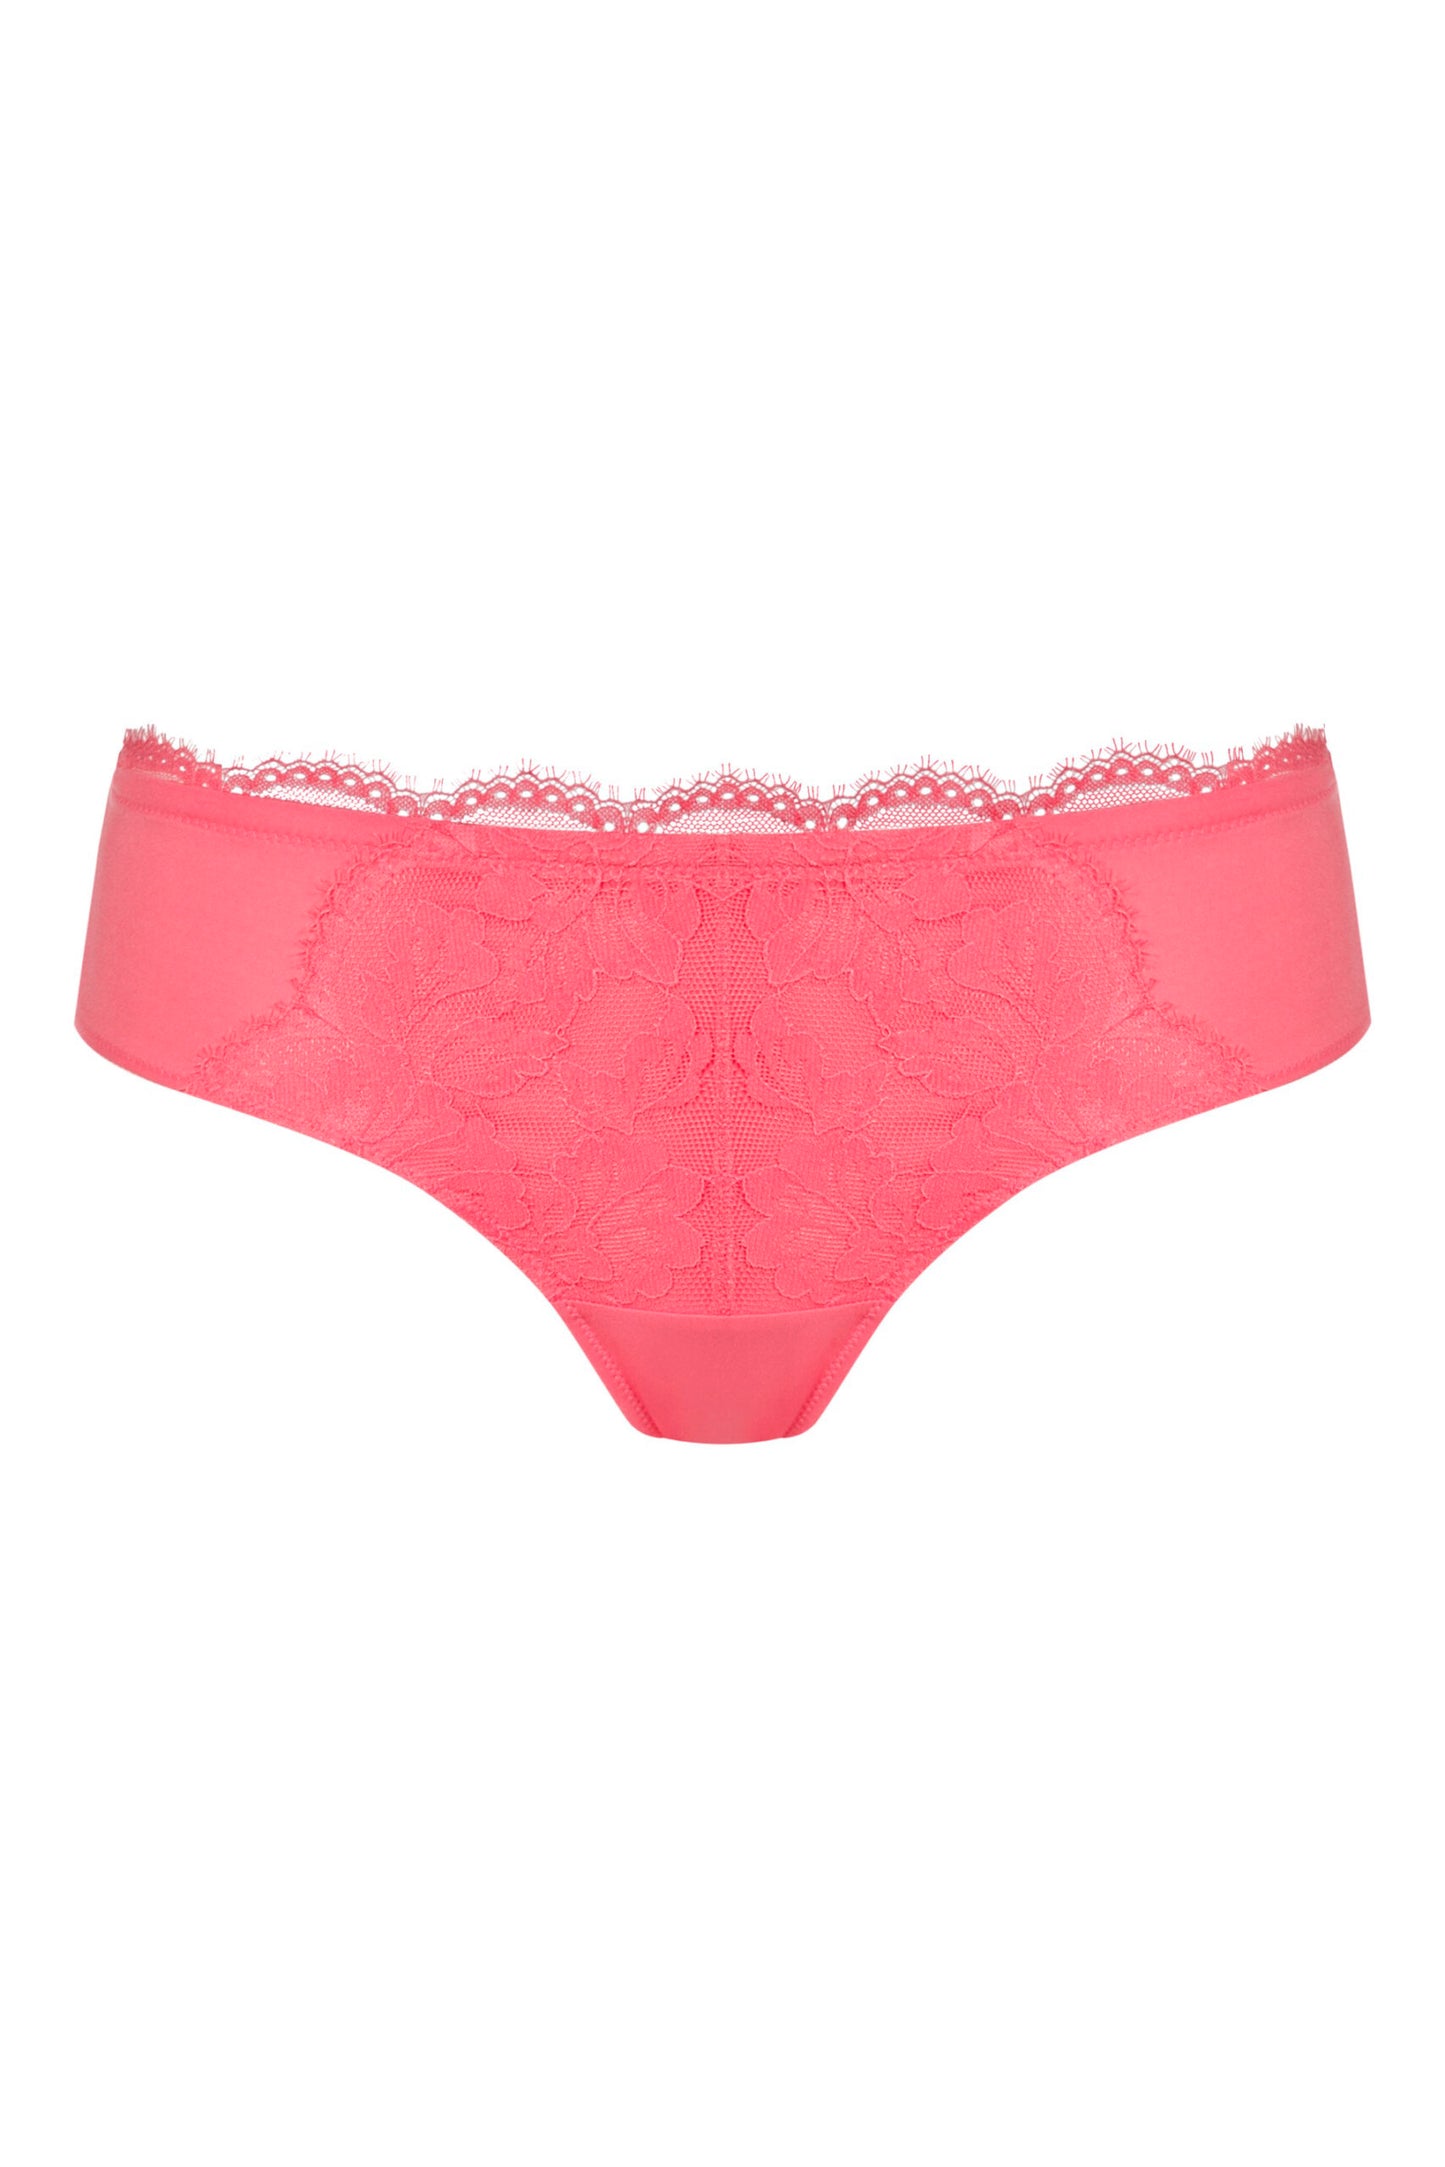 Mey Hipster - Amazing 79238 - Parrot Pink